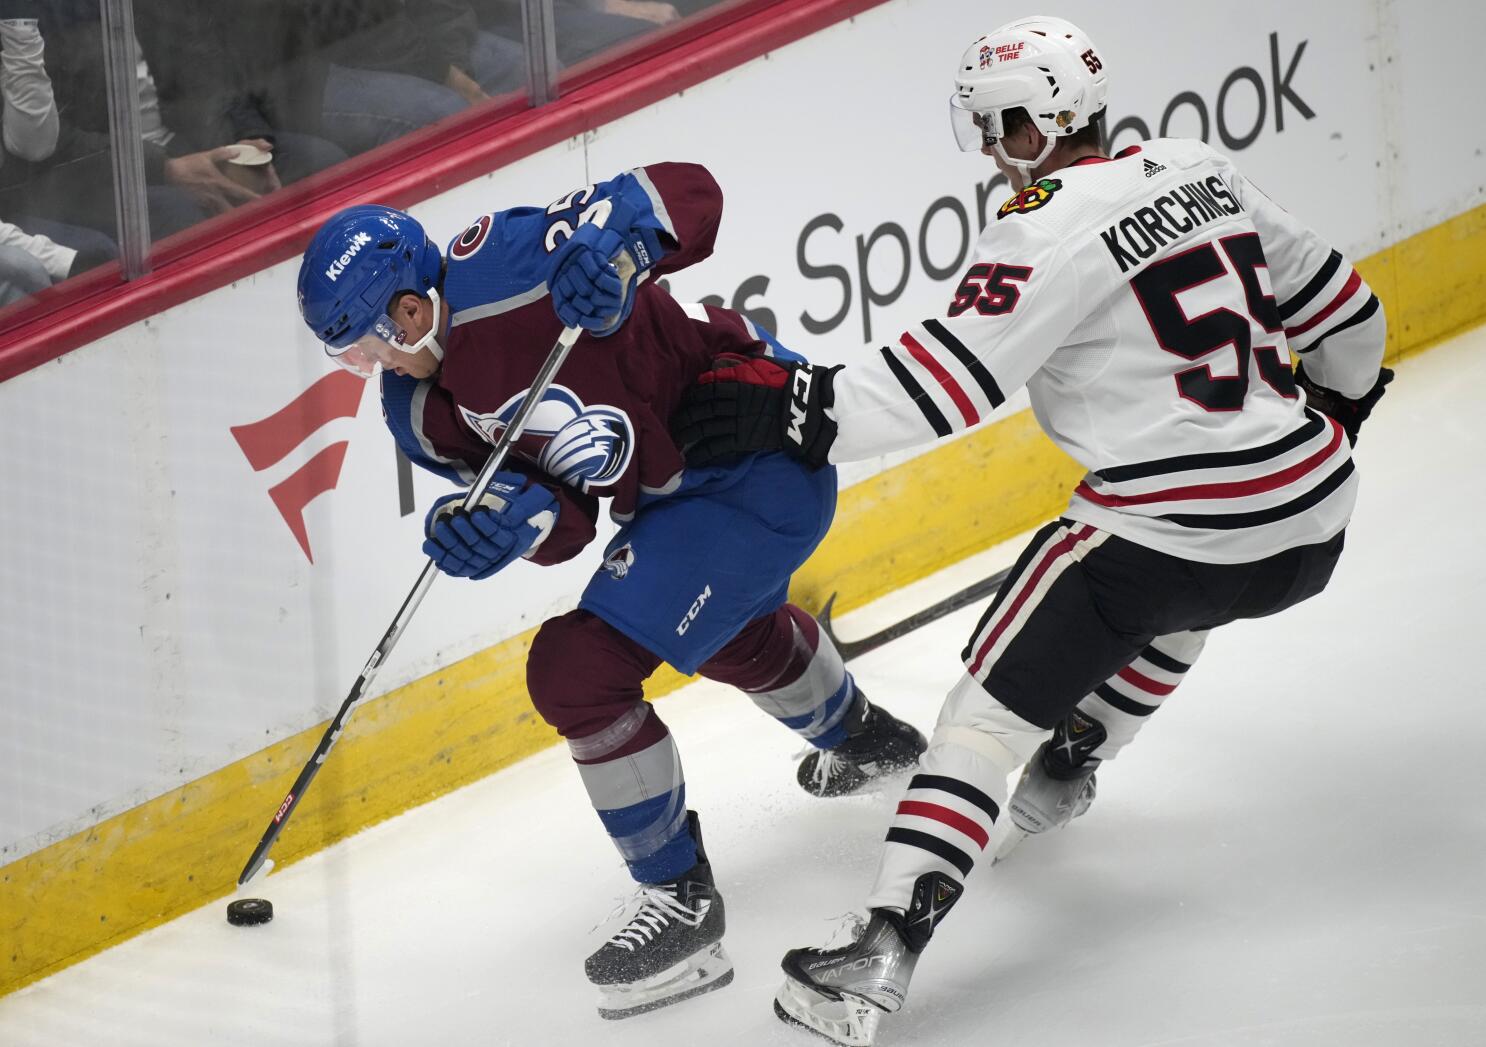 Nathan MacKinnon, Cale Makar lead charge for Avalanche in 4-0 win